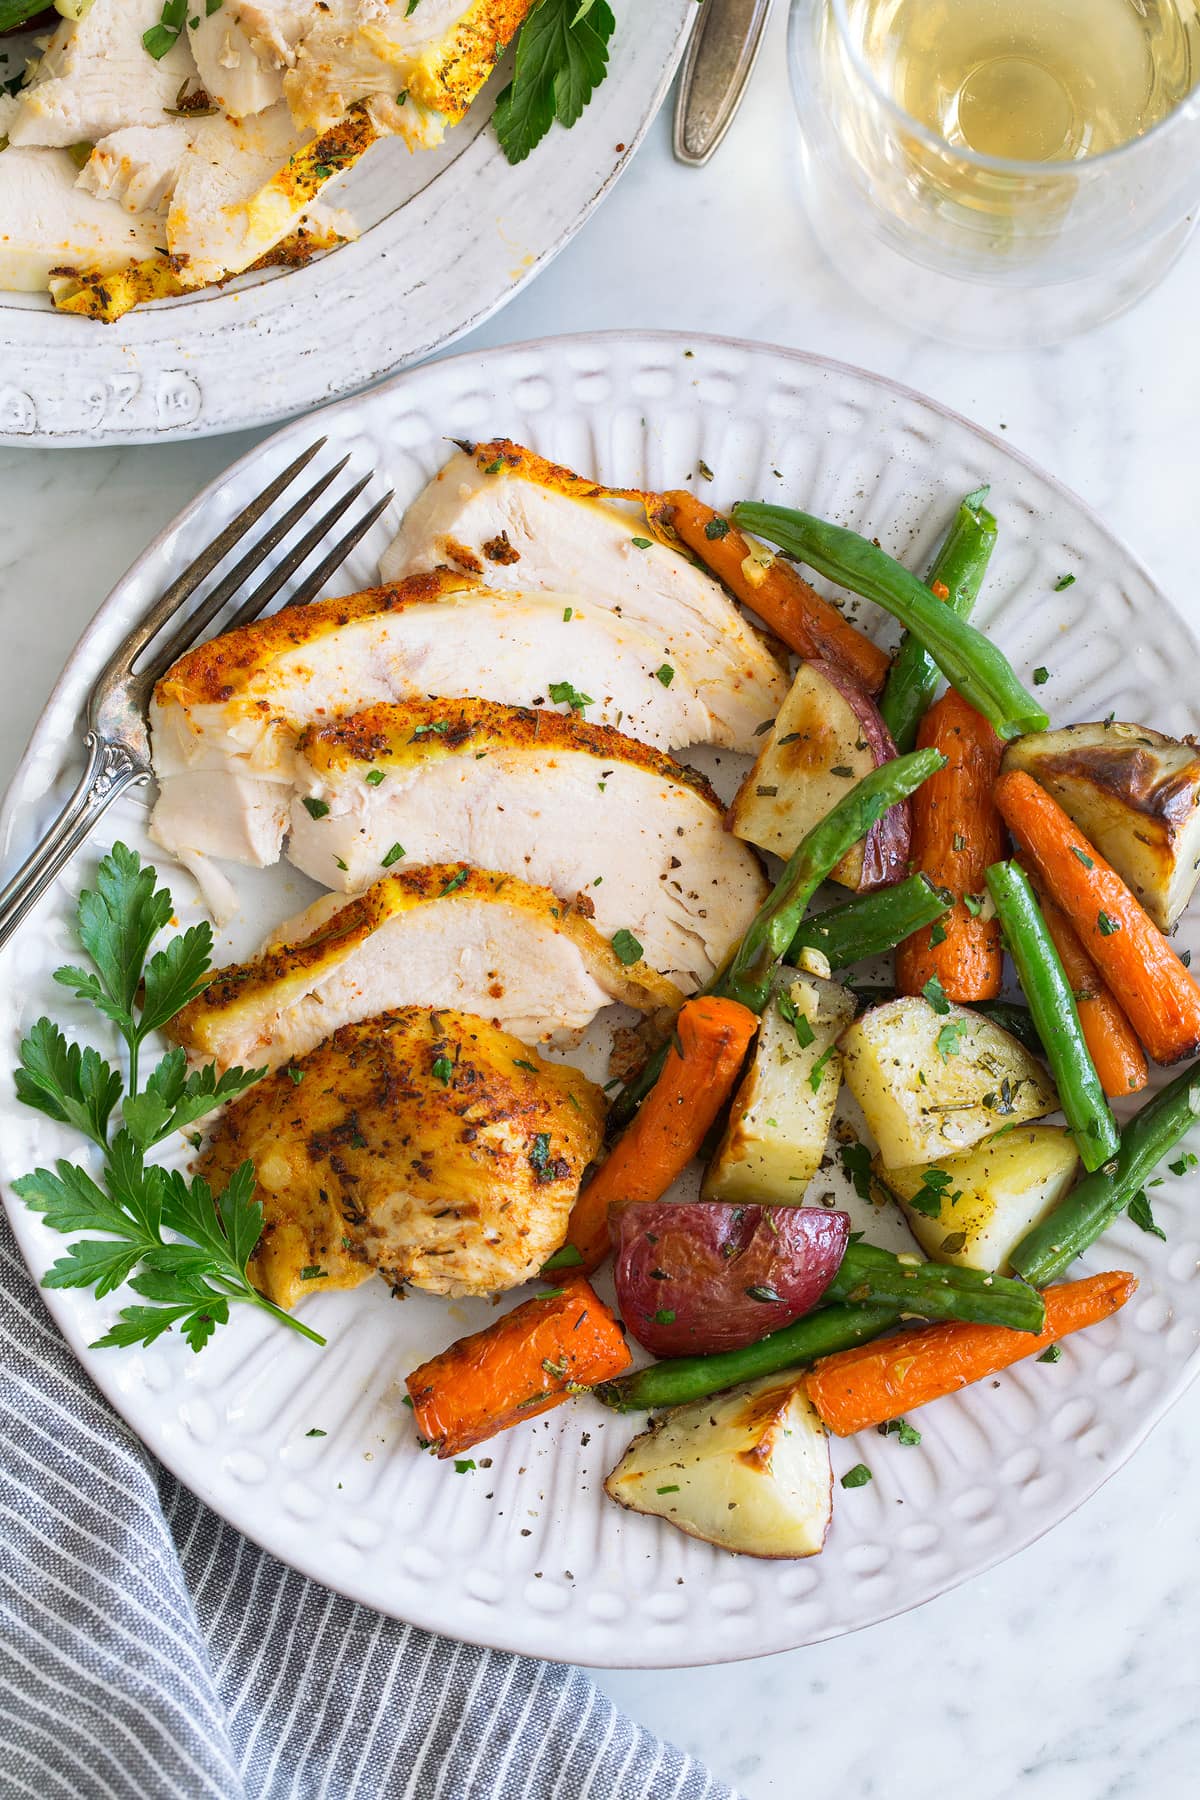 Slow Cooker Chicken serving on plate with roasted veggies